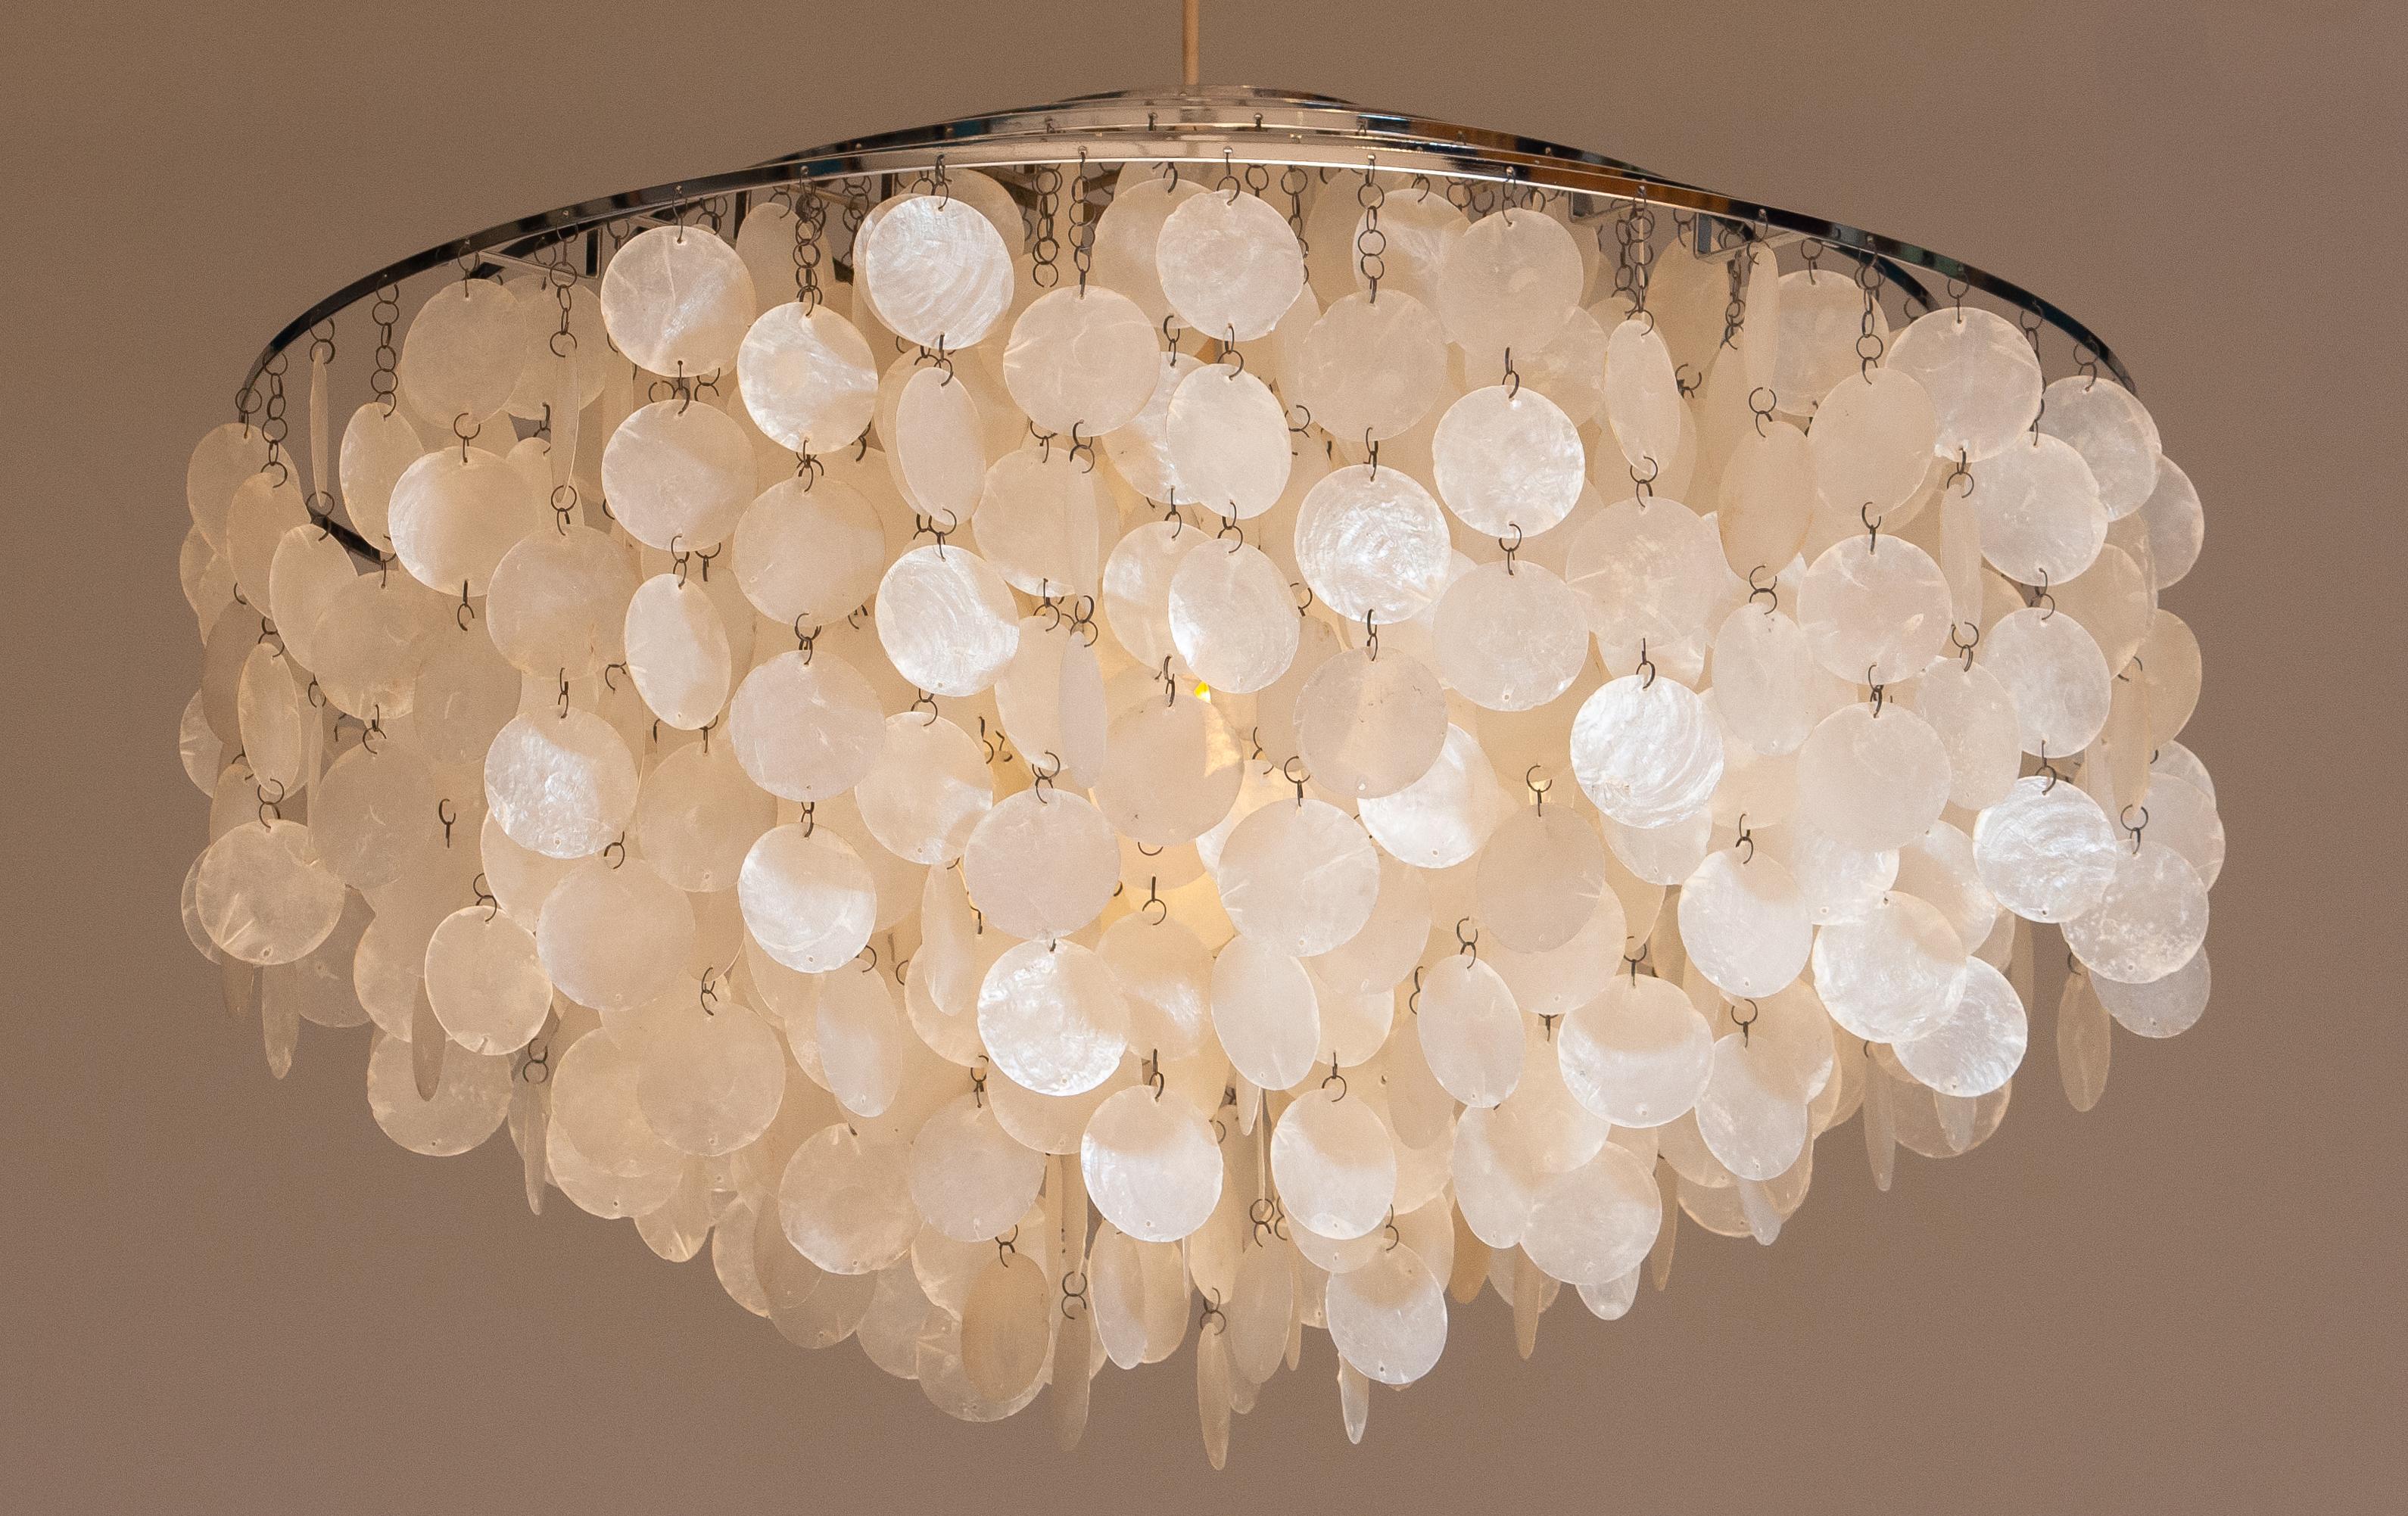 Mid-20th Century Pair of Extra Large Capiz Shell Chandeliers by Verner Panton for Luber AG. Swiss